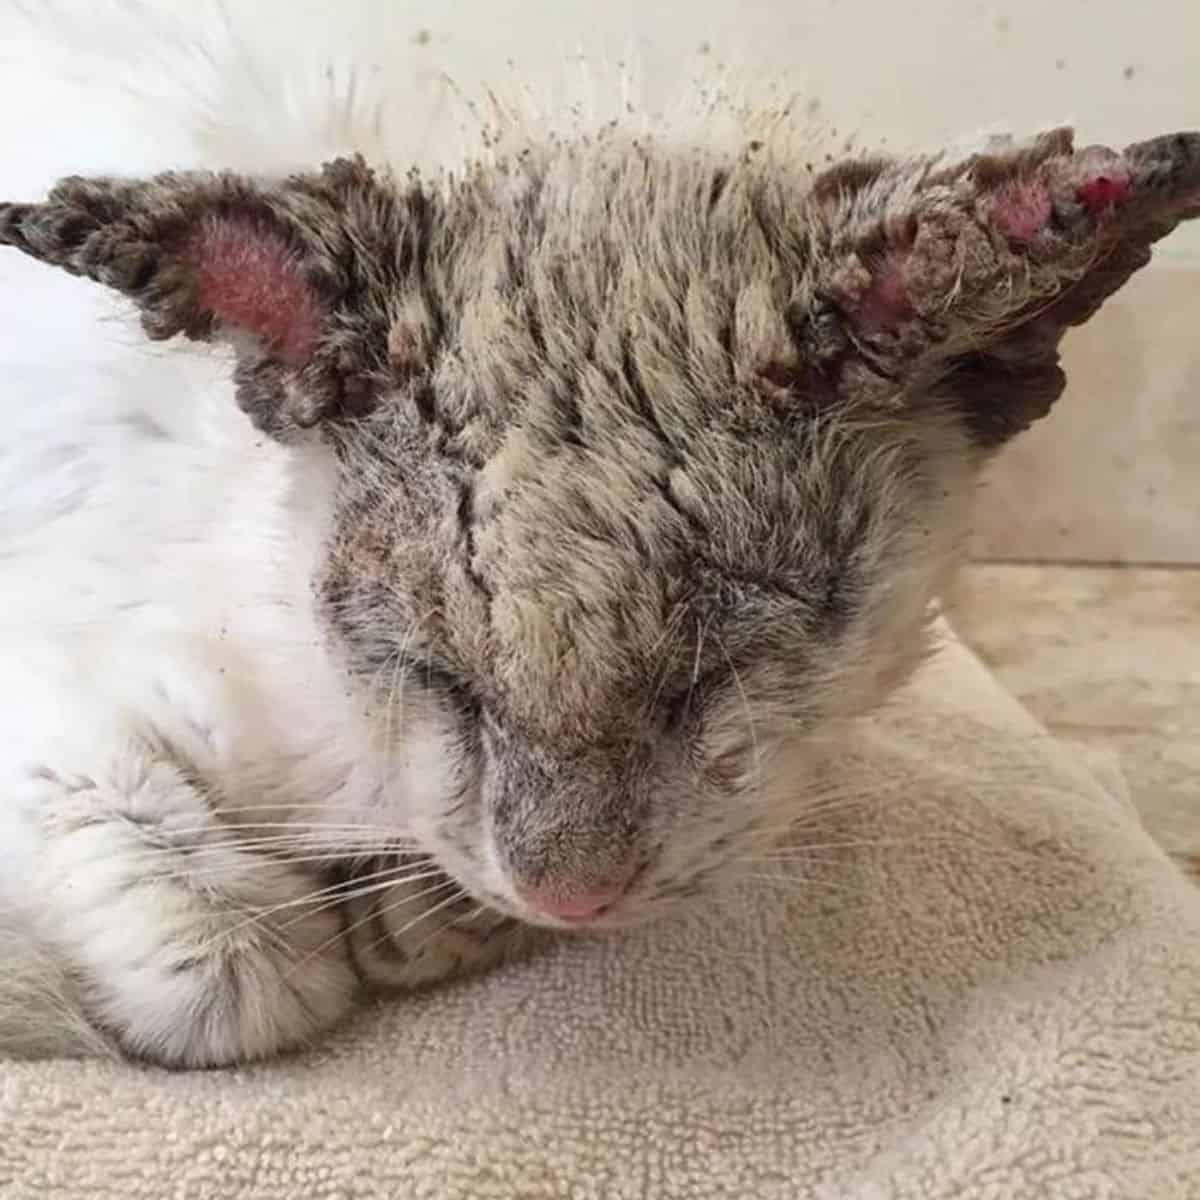 a sick cat with its head down